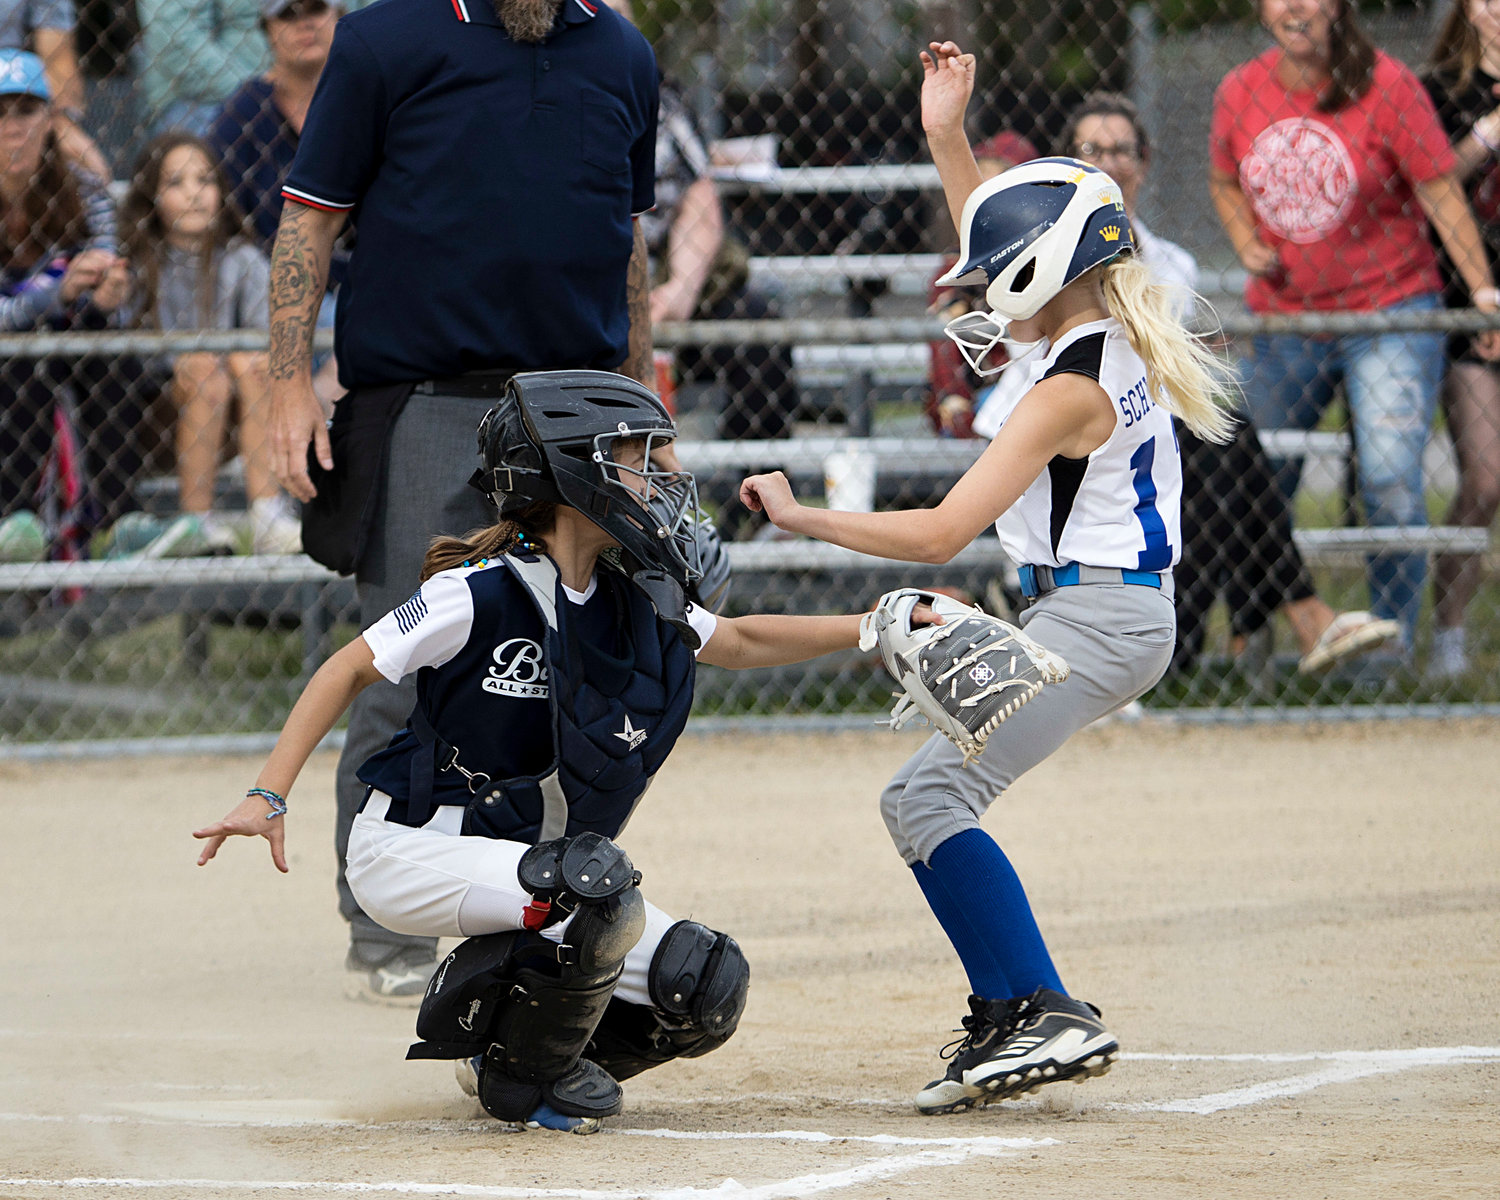 Angie Promades tags a Middletown runner at home plate.